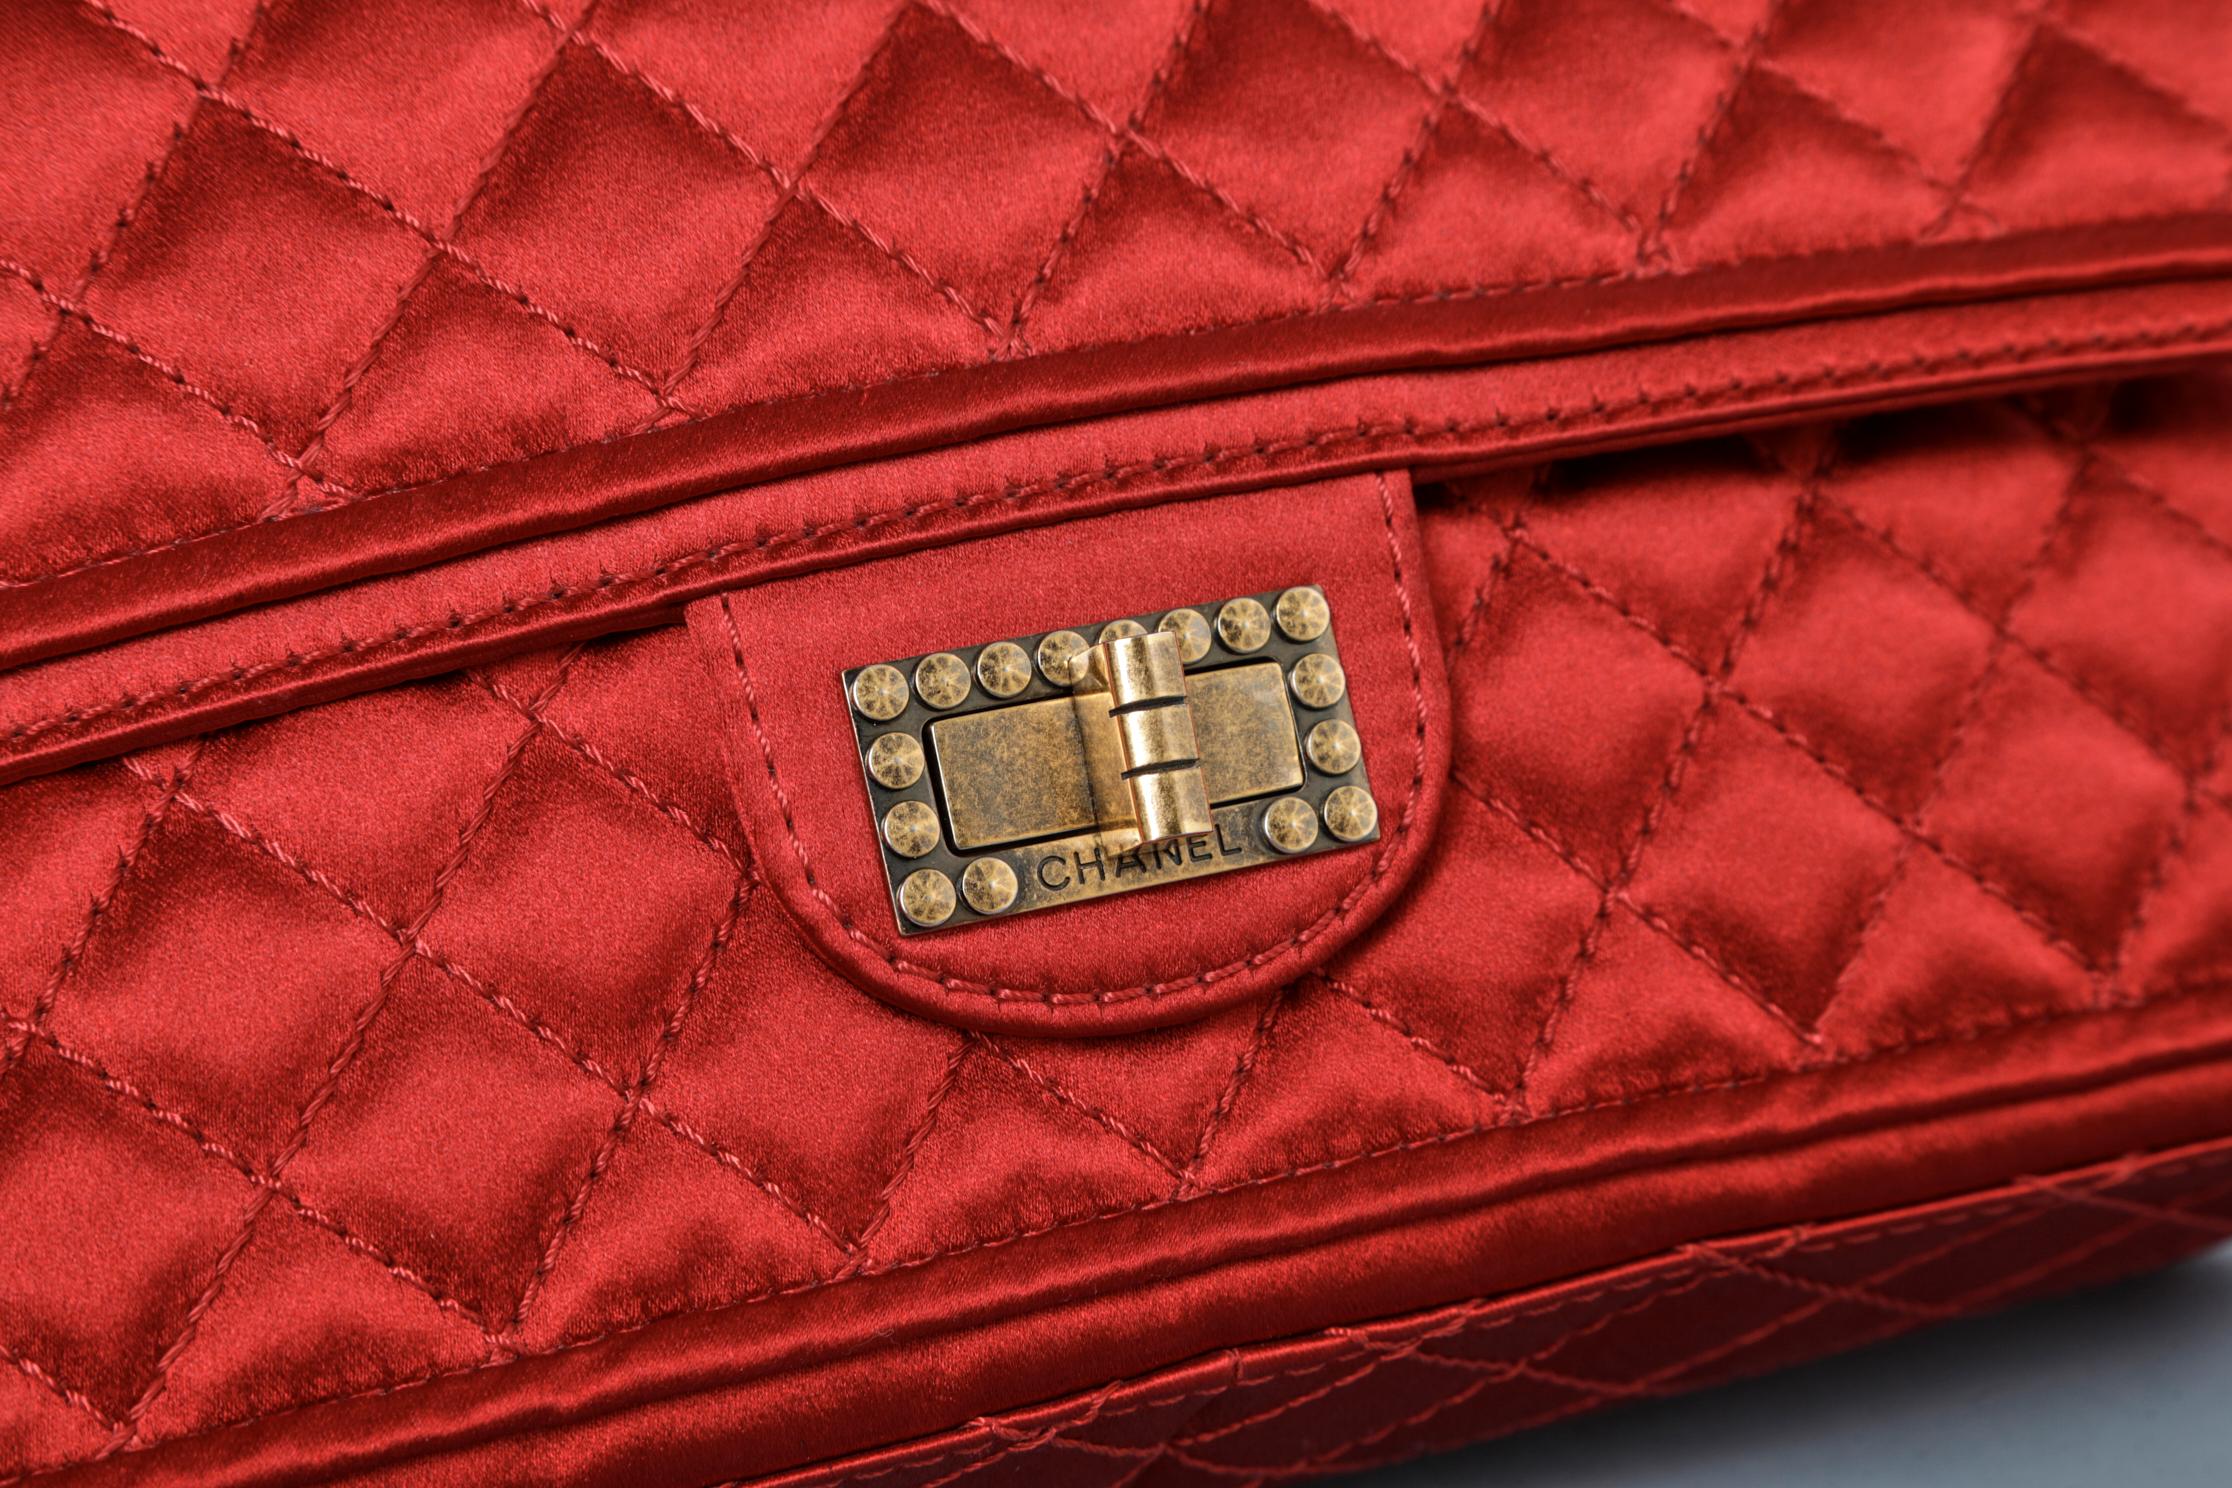 Satin Ruby Chanel bag Paris-Shangai Metiers d'Arts 2011
Size:
width= 28 cm
height= 19 cm
wide= 8cm 
Double chain in aged metal color and double flap ( the one underneath is shorter than the one on the top)